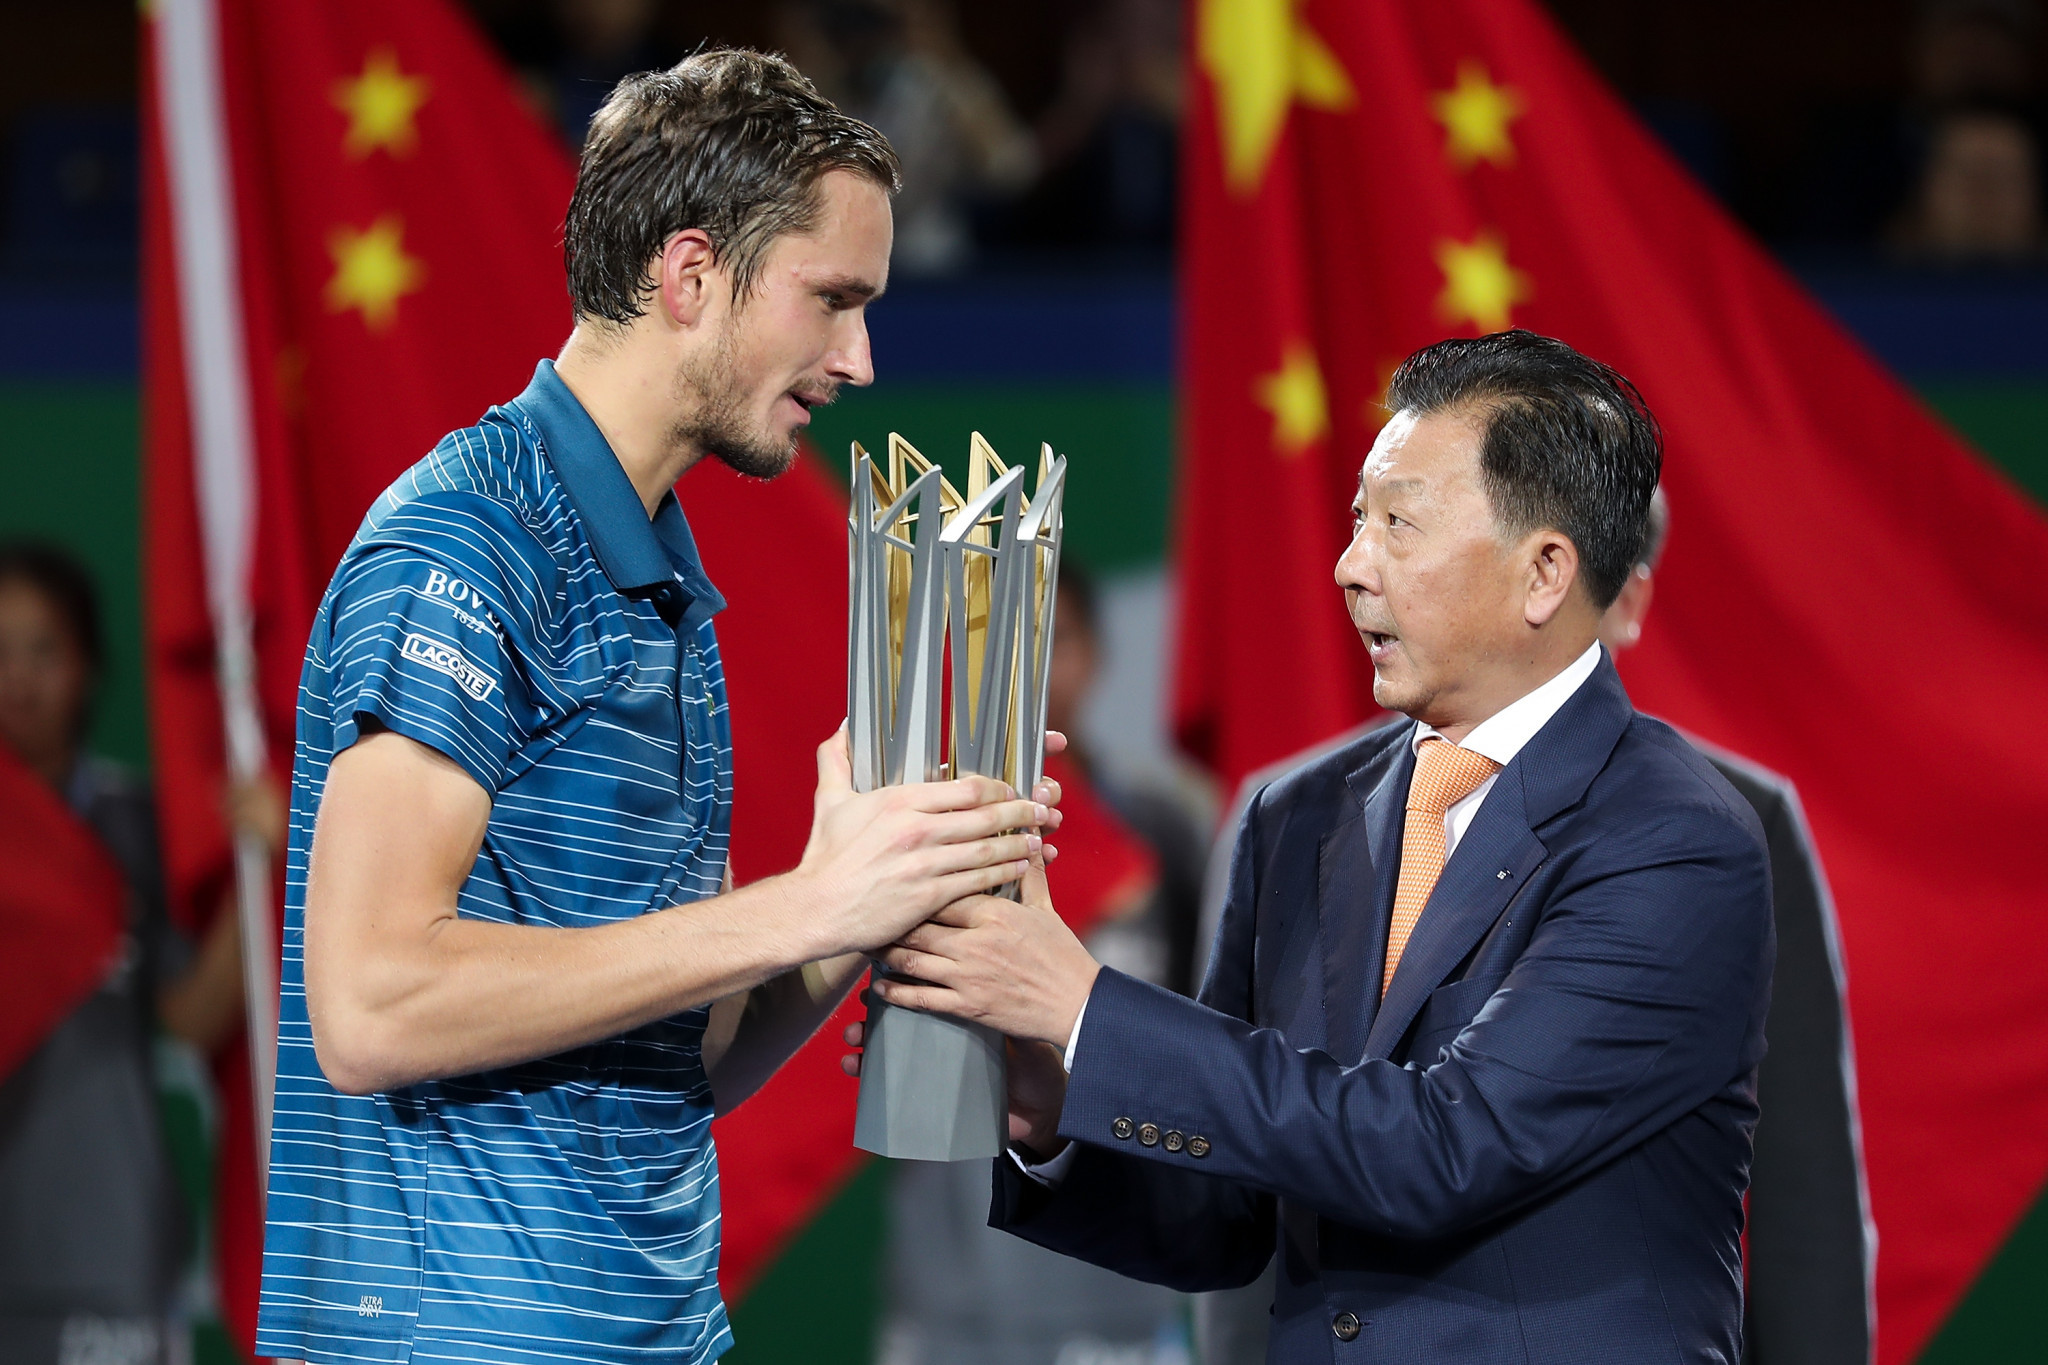 The Shanghai Masters is among the ATP events to be cancelled ©Getty Images